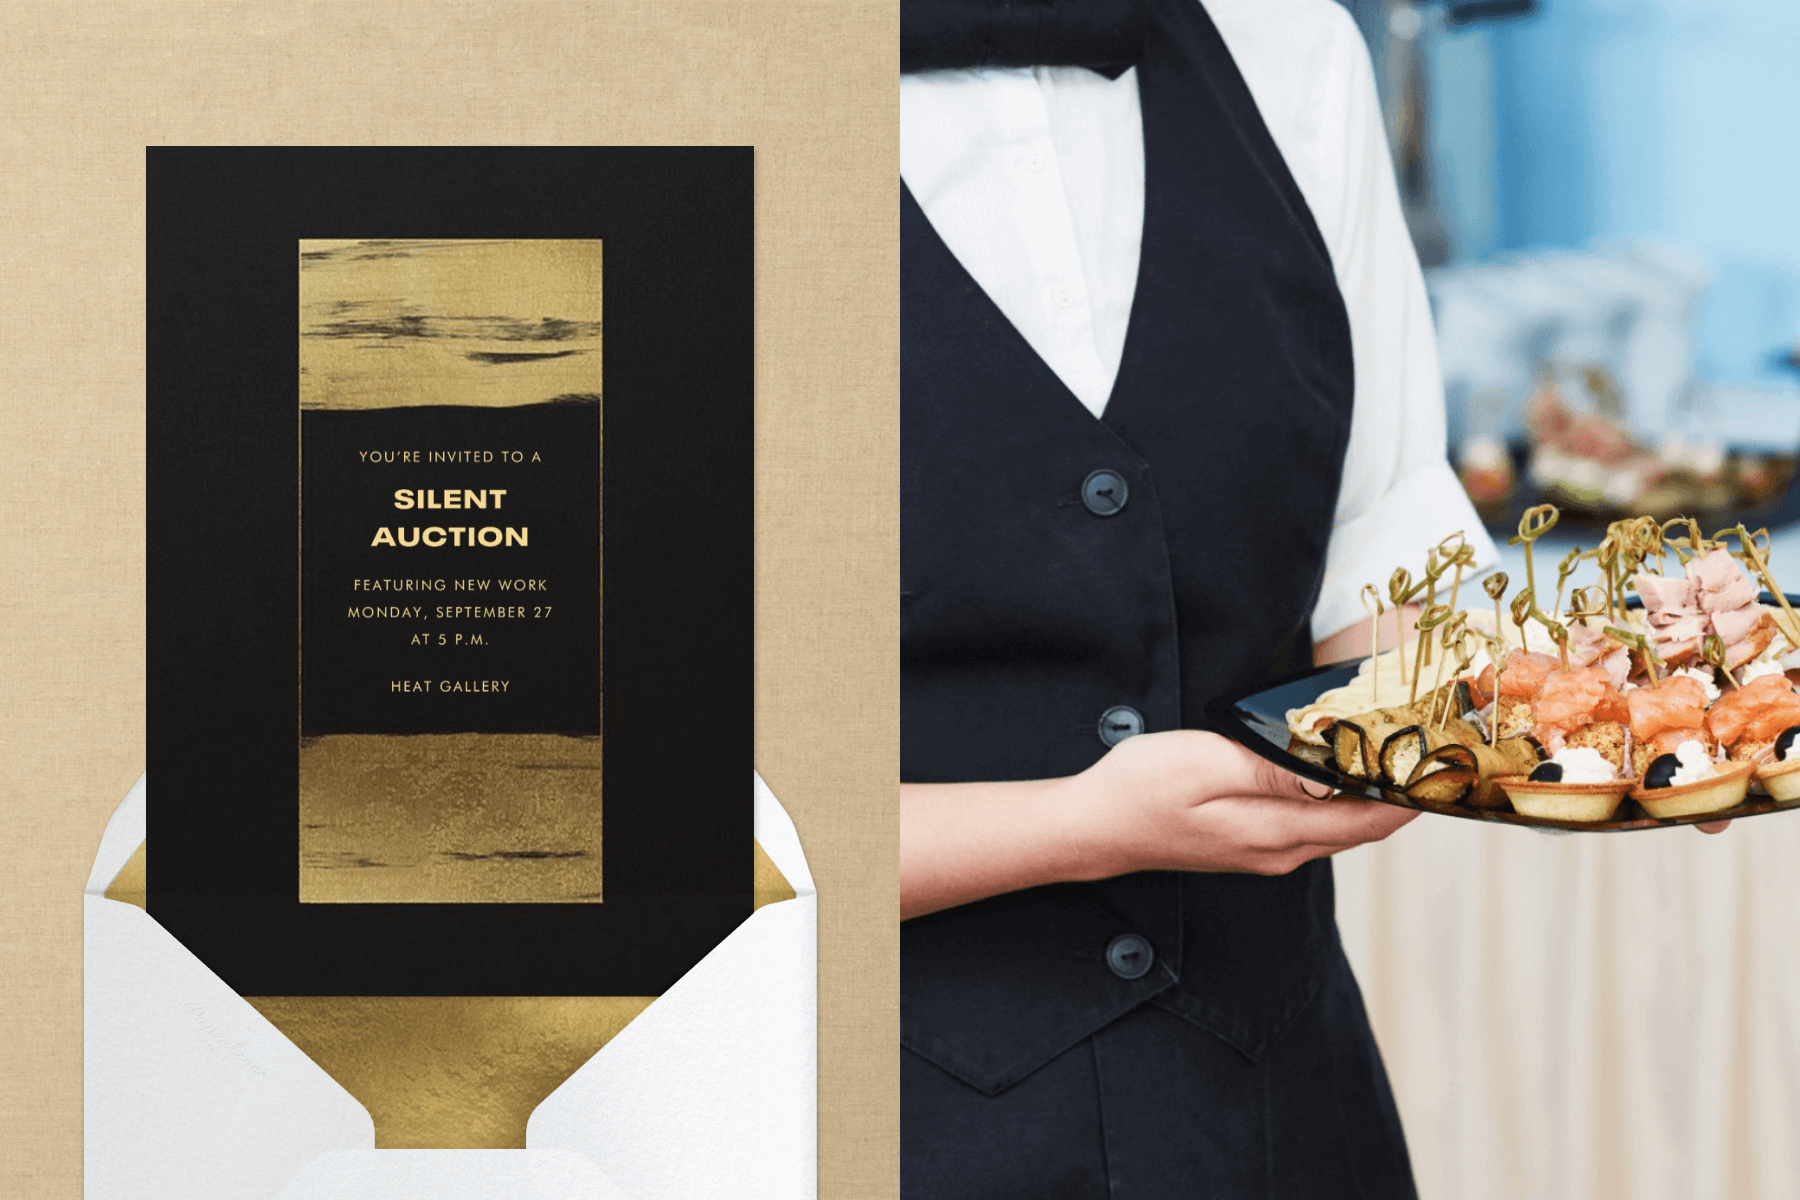 Left: A black Silent Auction invitation with a gold outlined rectangle in the center and brushstroke gold on top and bottom, above a white envelope. Right: A catering staff member in a black vest and white shirt holds a plate with passed hors d'oeuvres.